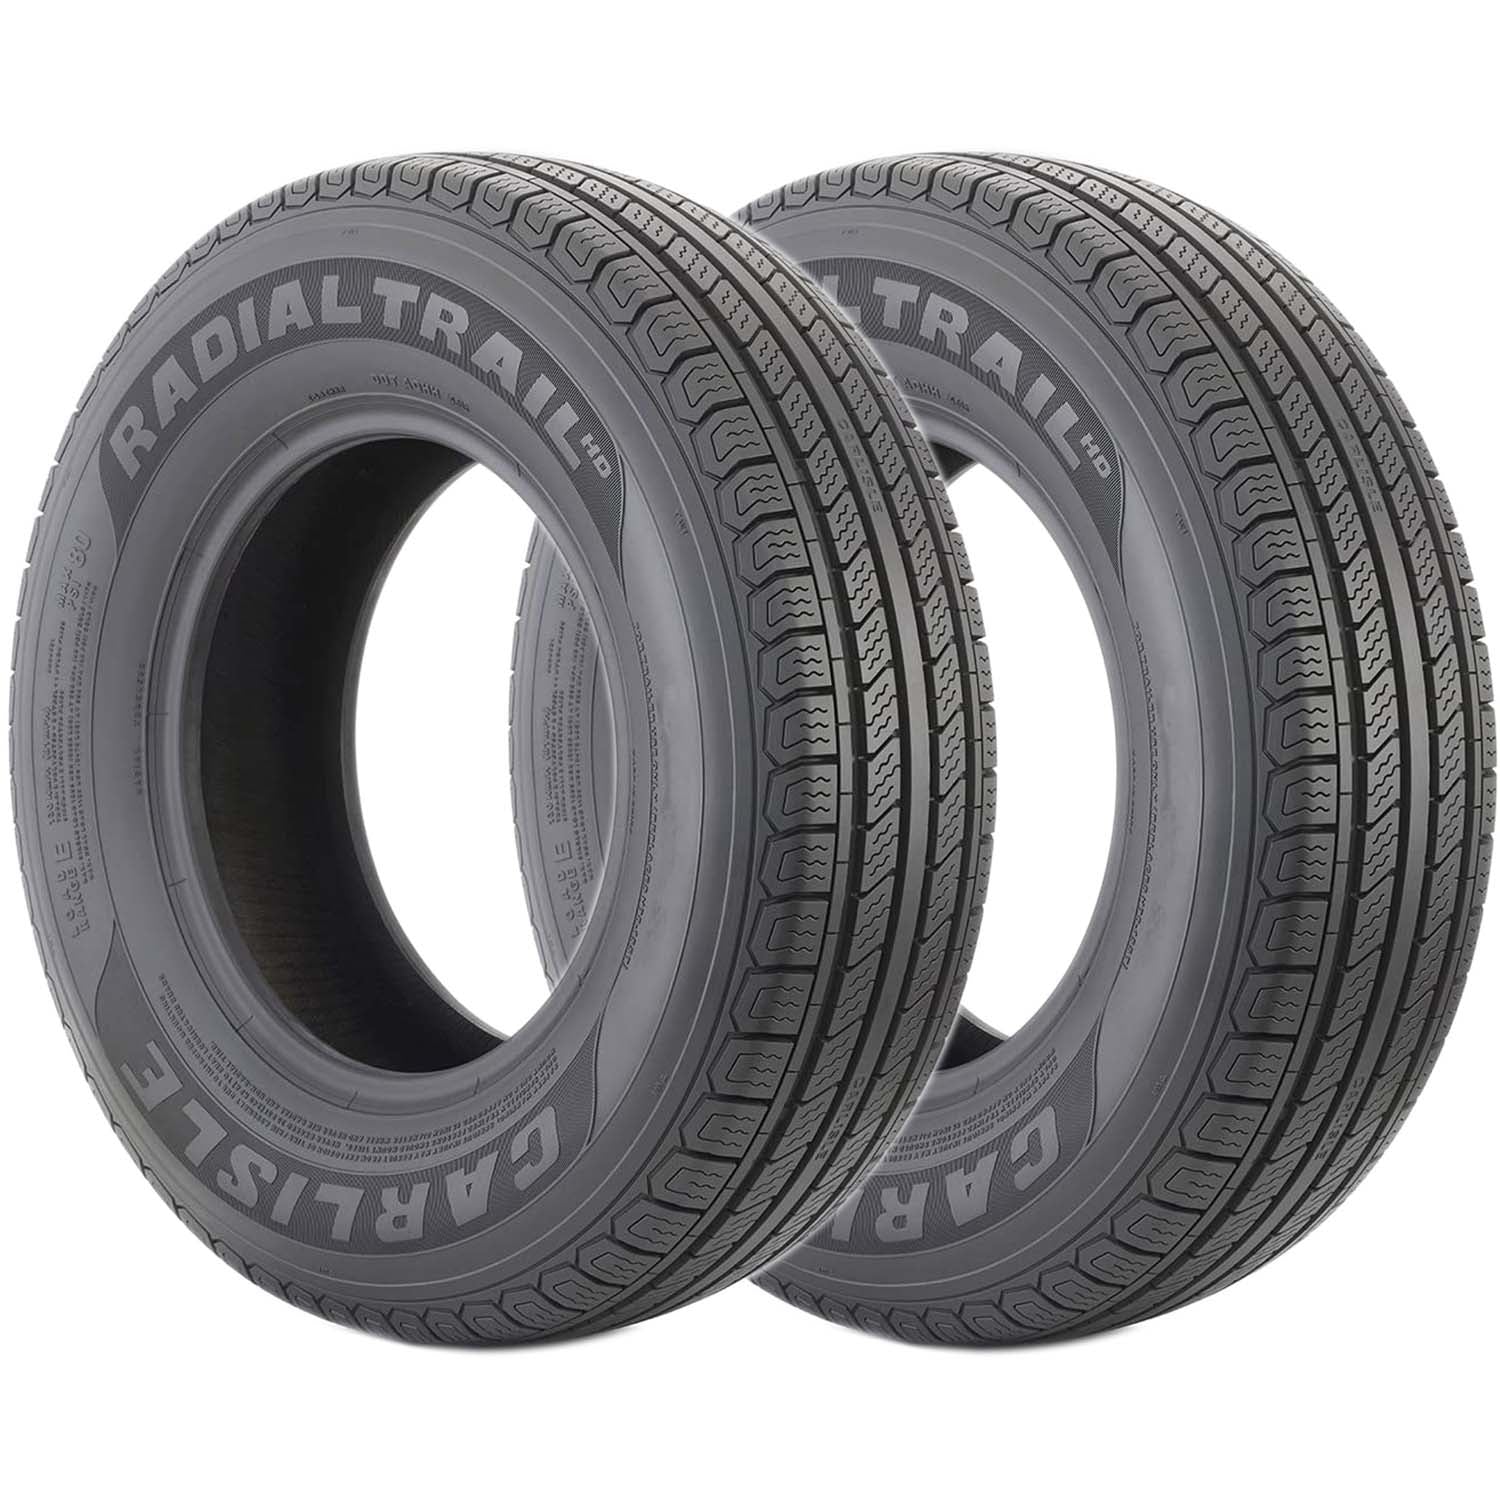 Carlisle Radial Trail HD Trailer Tire LRC 6ply 205/75R14 Pack of 2